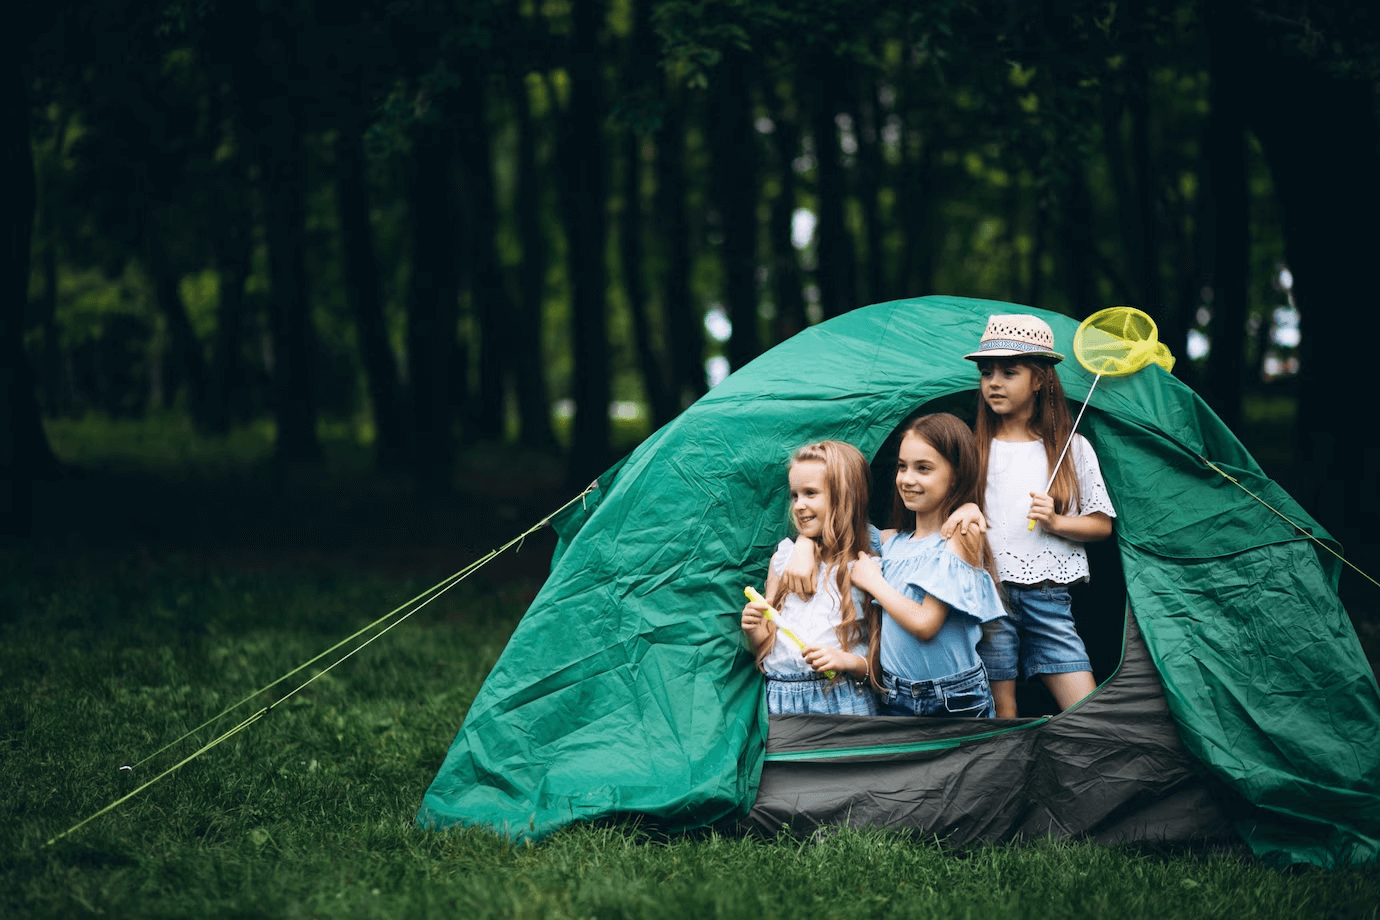 How to Have the Best Camping Trip with Kids